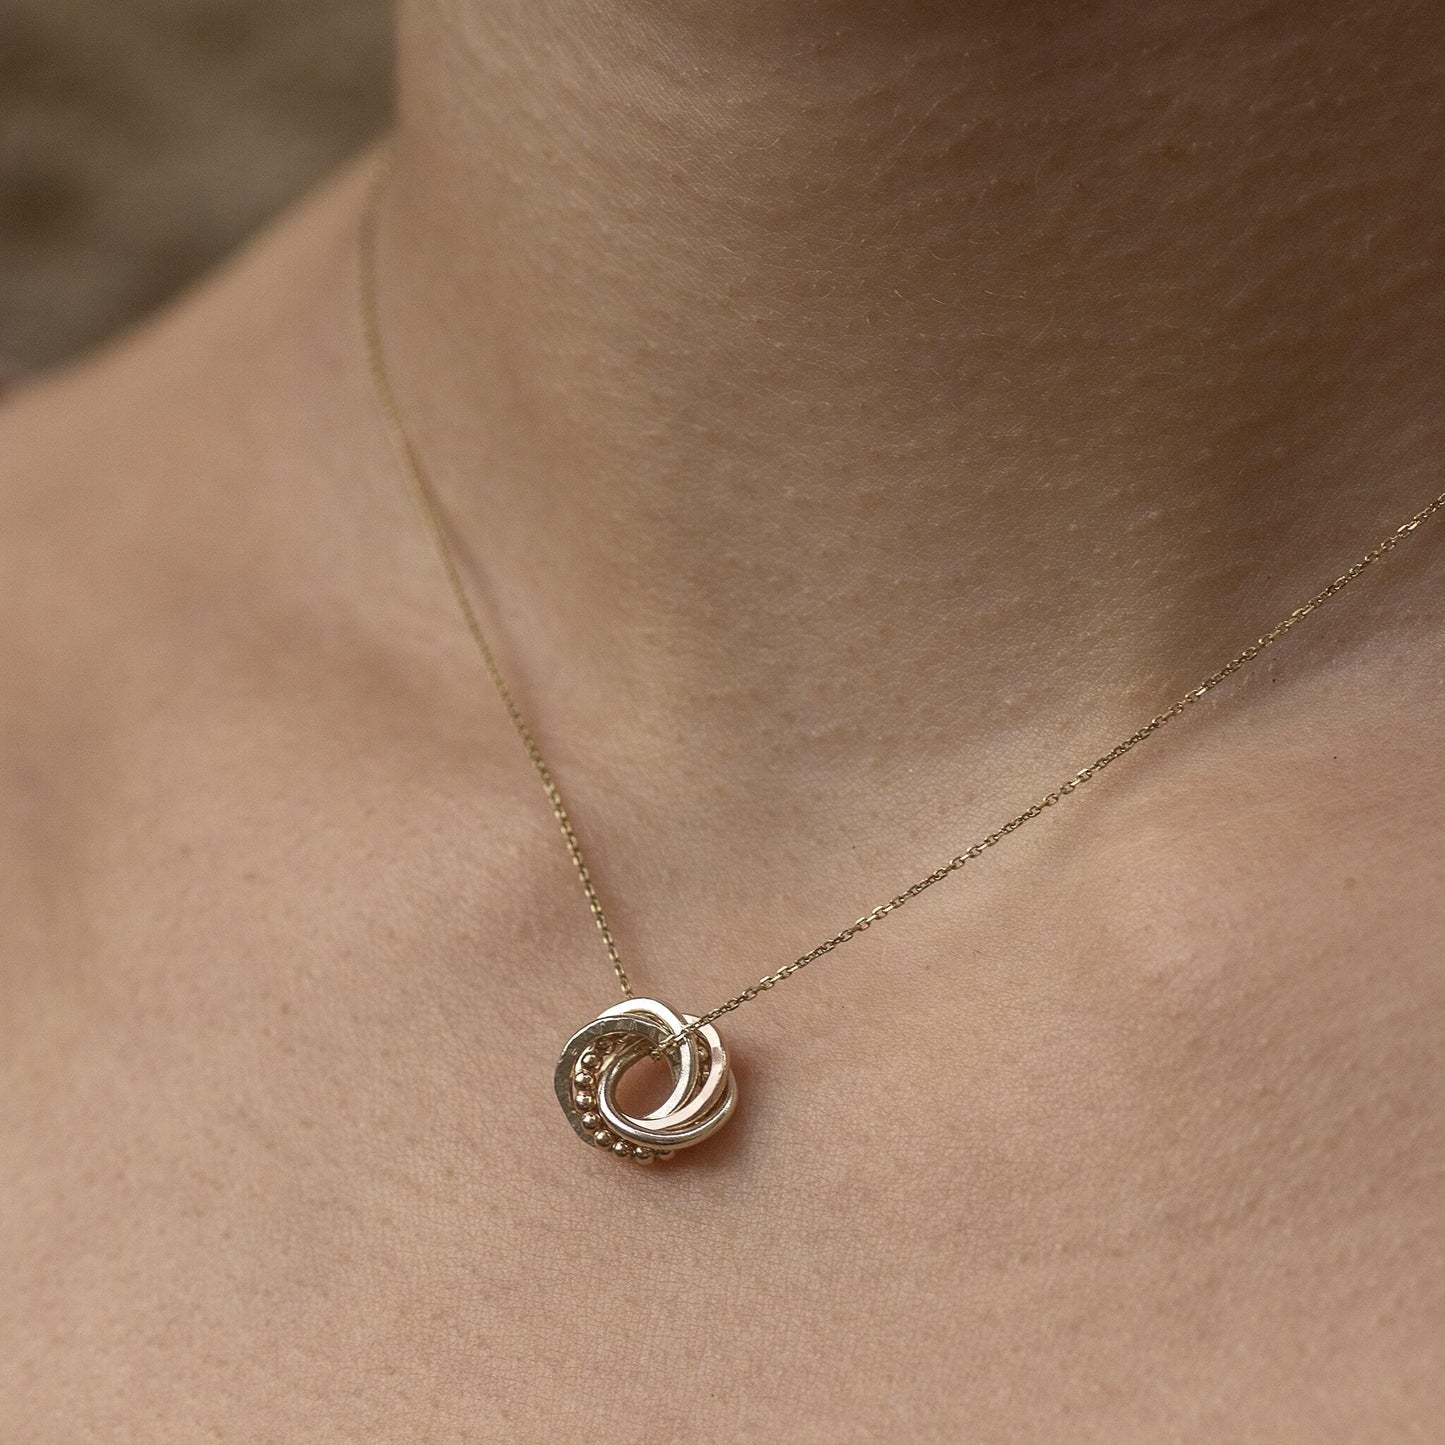 Tiny 9kt Gold 5 Link Love Knot Necklace - Recycled White Gold - Yellow Gold - Rose Gold - 5 Links for 5 Loved Ones